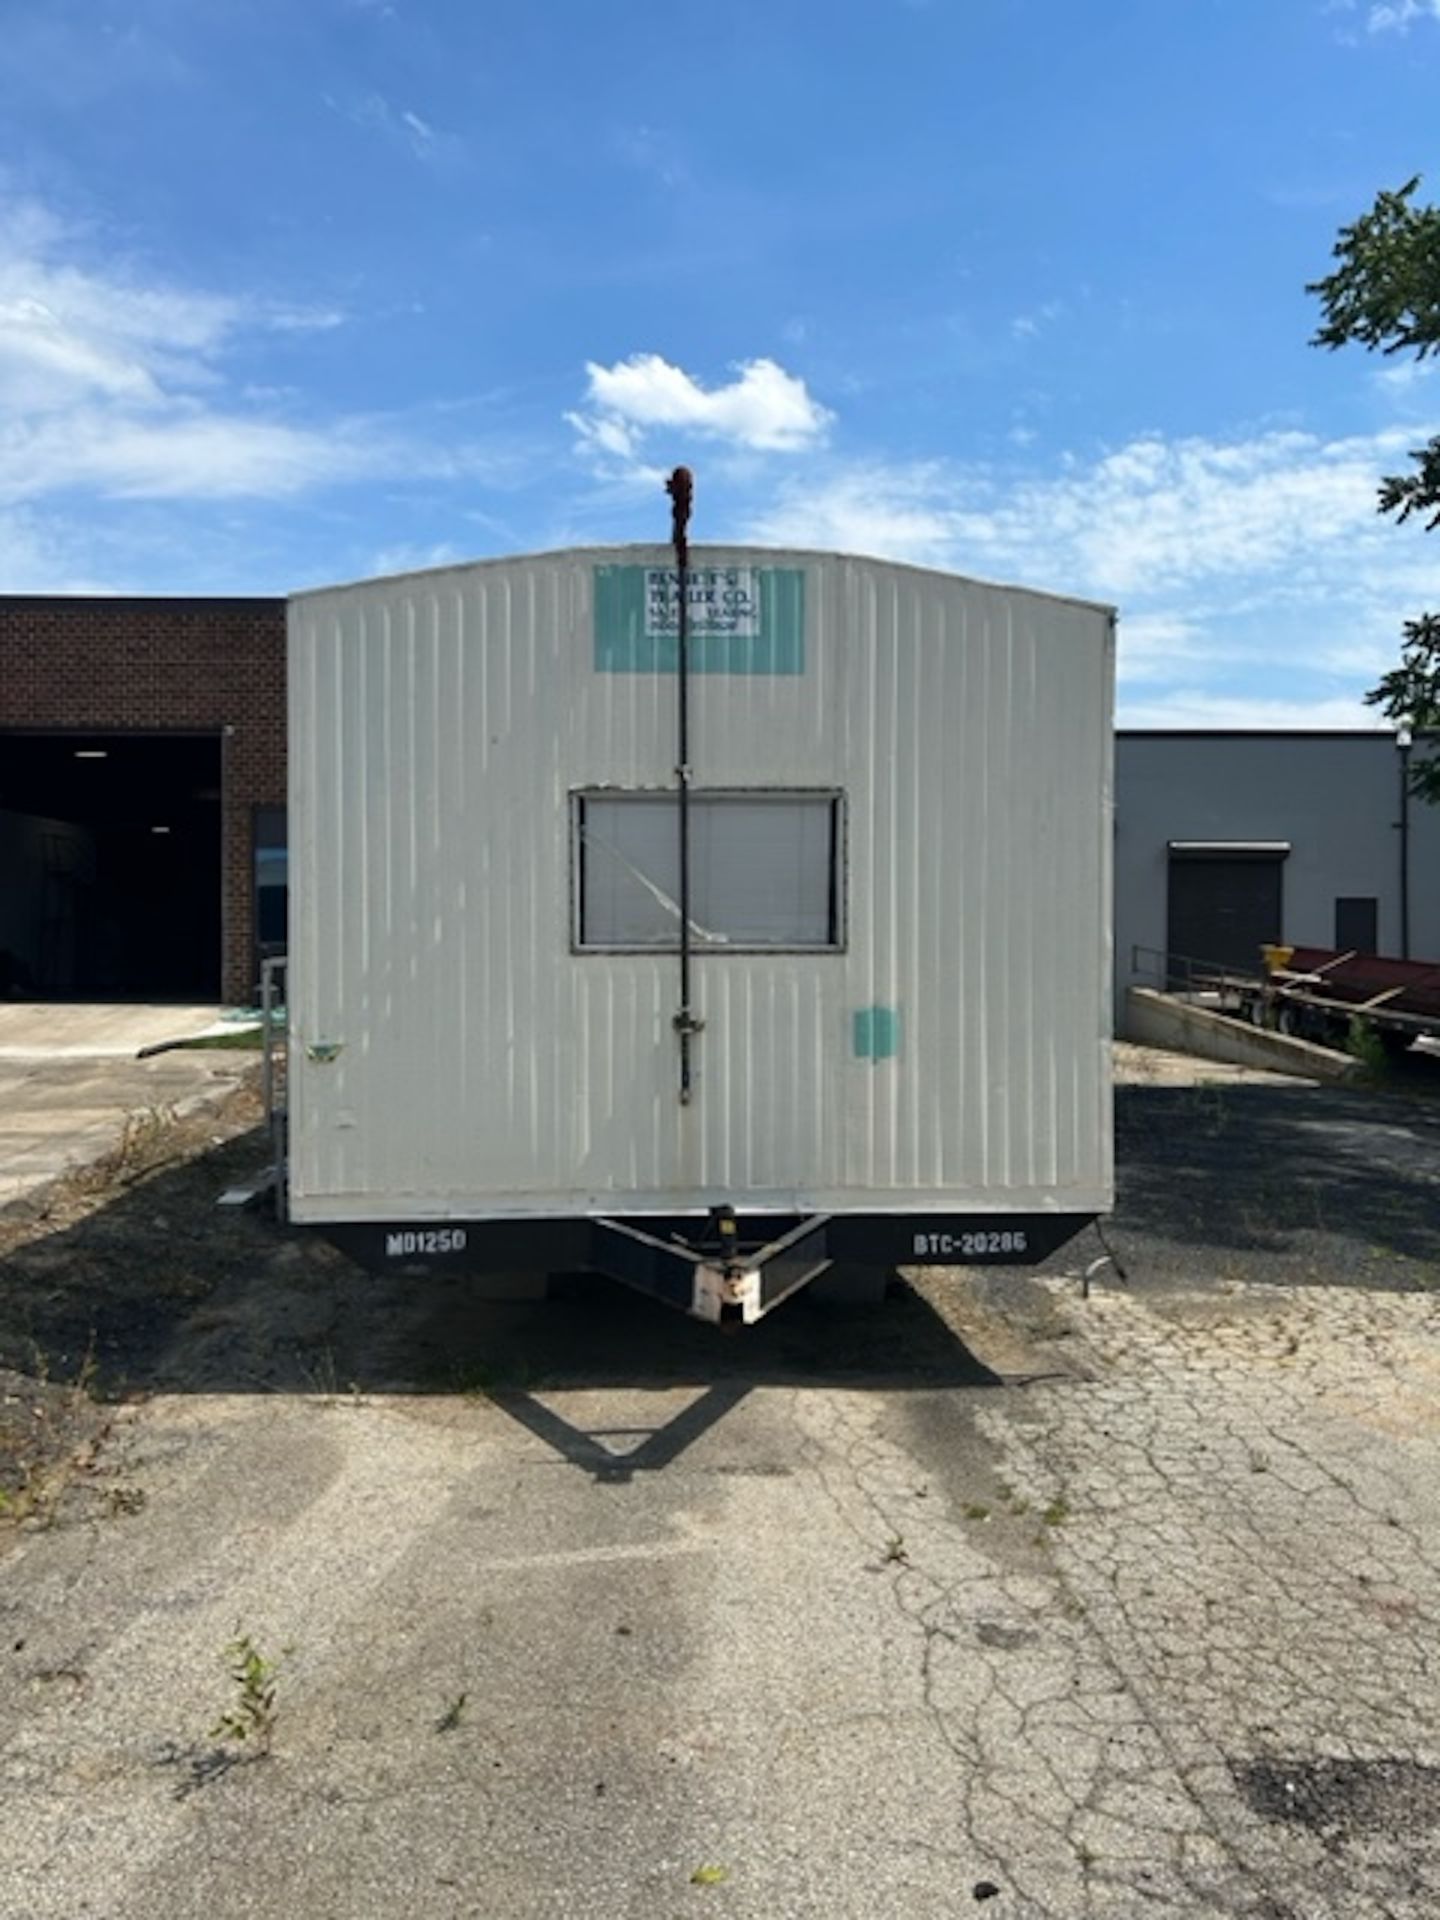 Office Trailer (ASG1) - Image 2 of 8